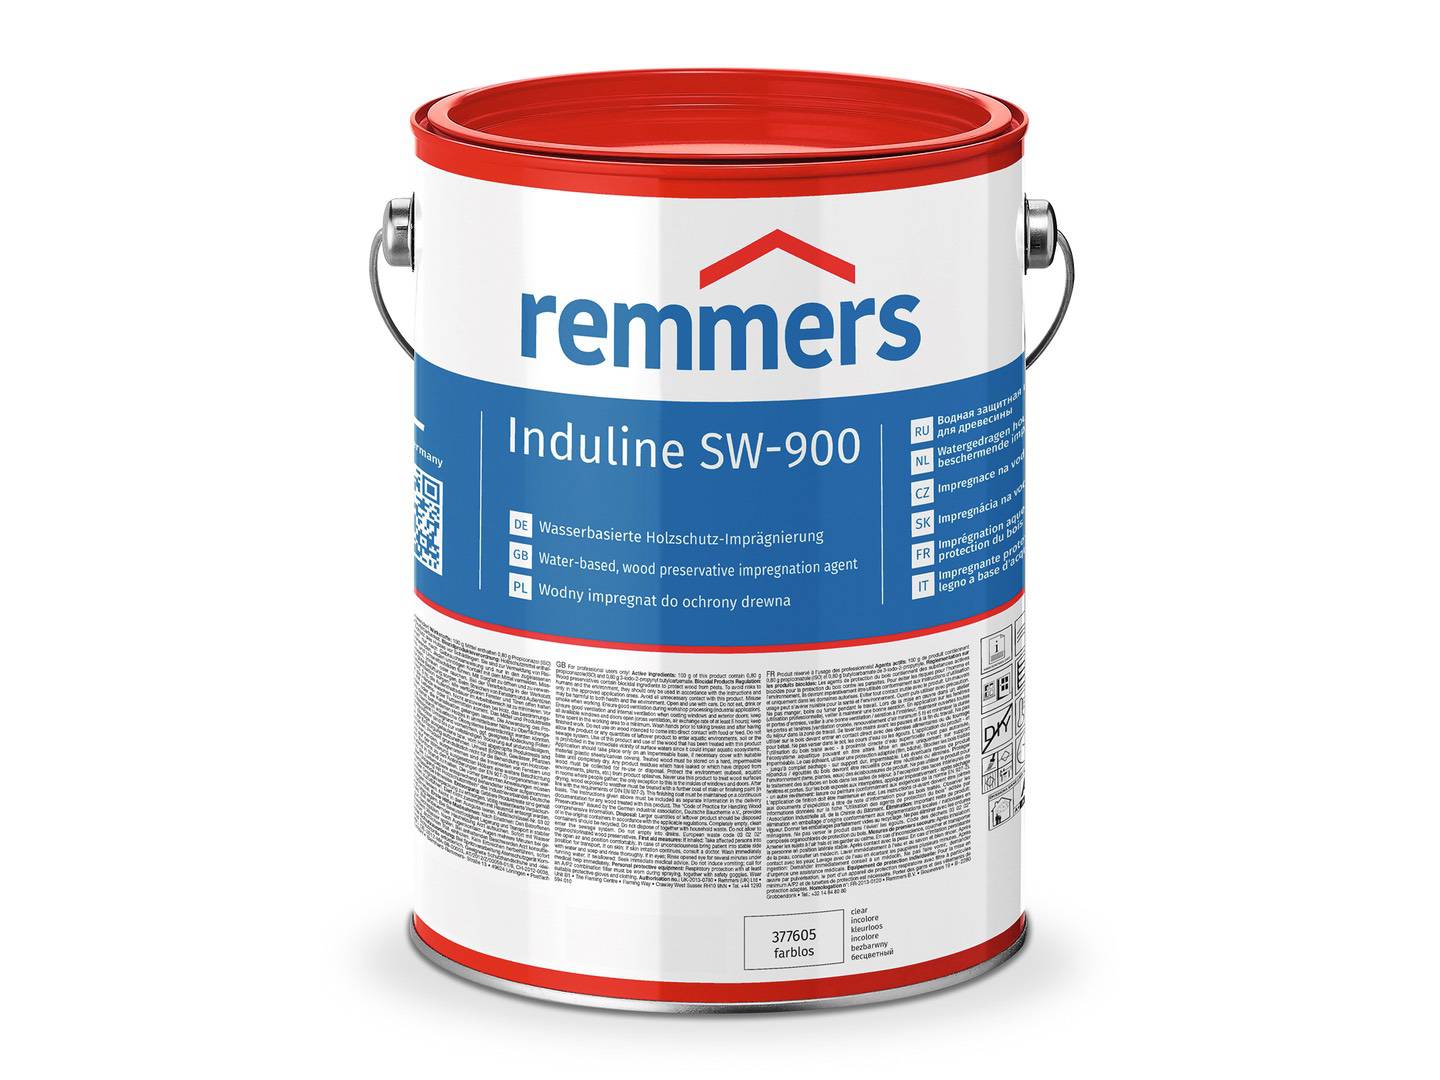 REMMERS Induline SW-900